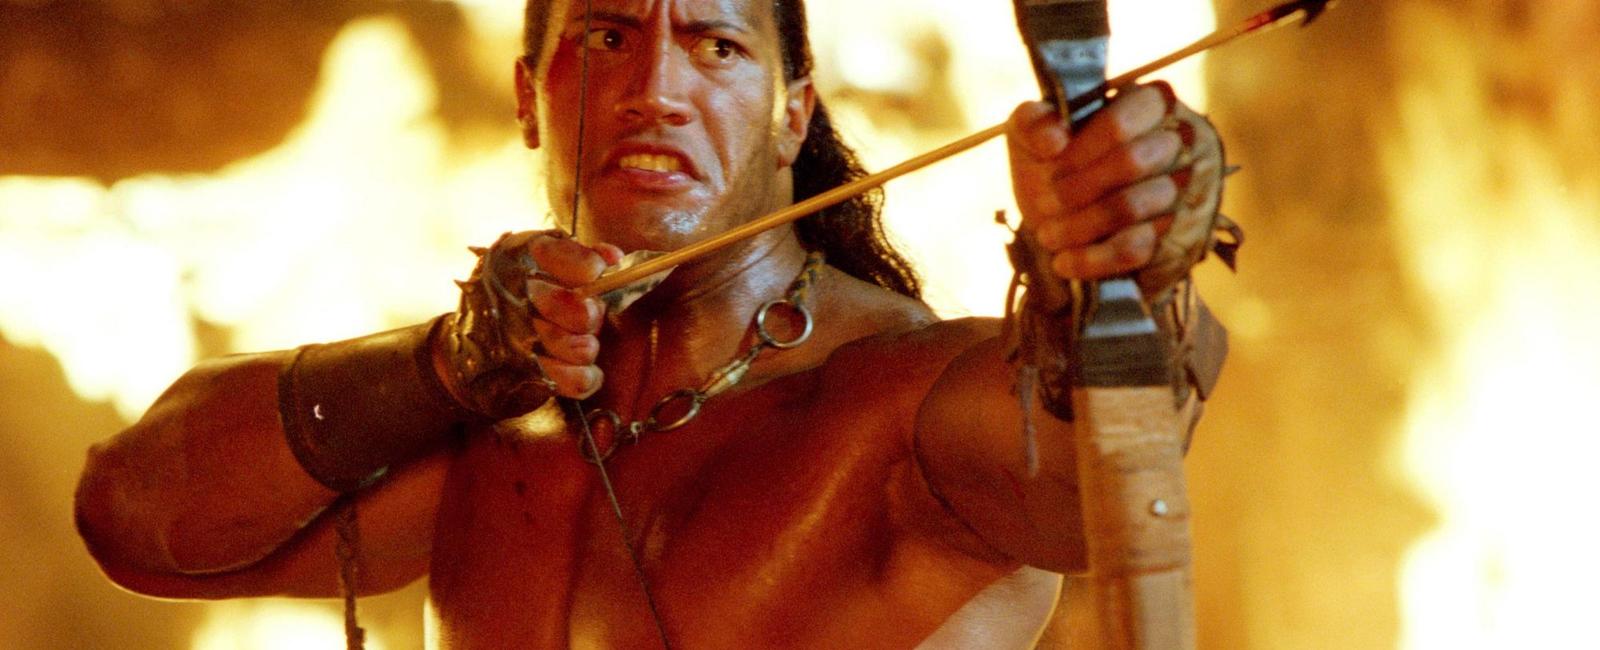 Dwayne the rock johnson was offered 5 5 million for his first ever movie role in scorpion king which was a record salary for an untested actor